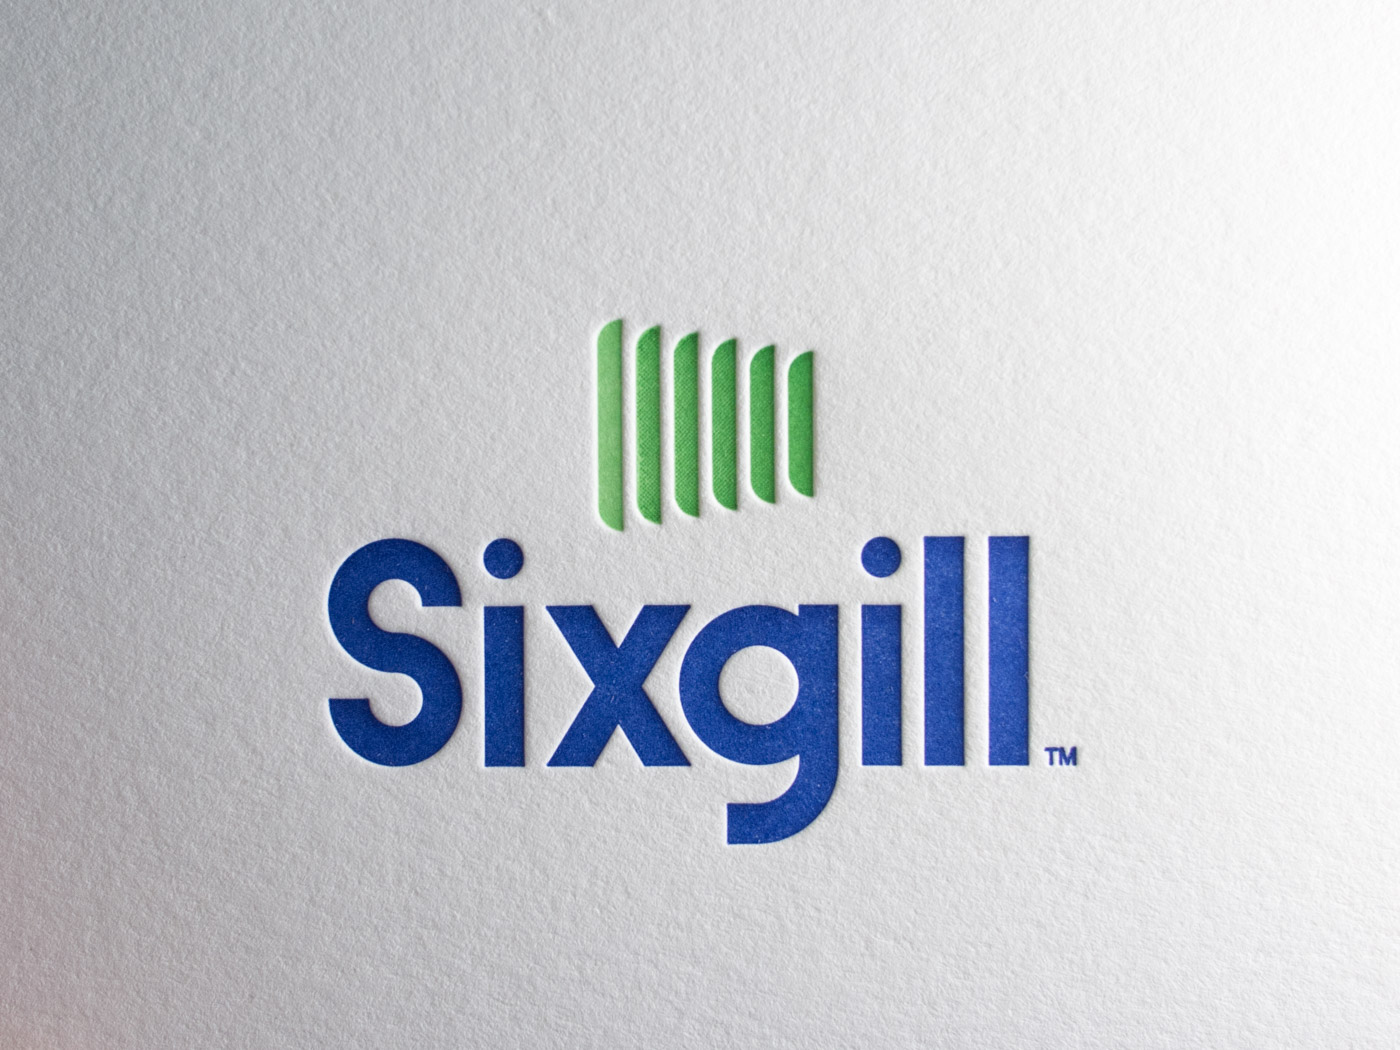 Sixgill | Printed by Parklife Press